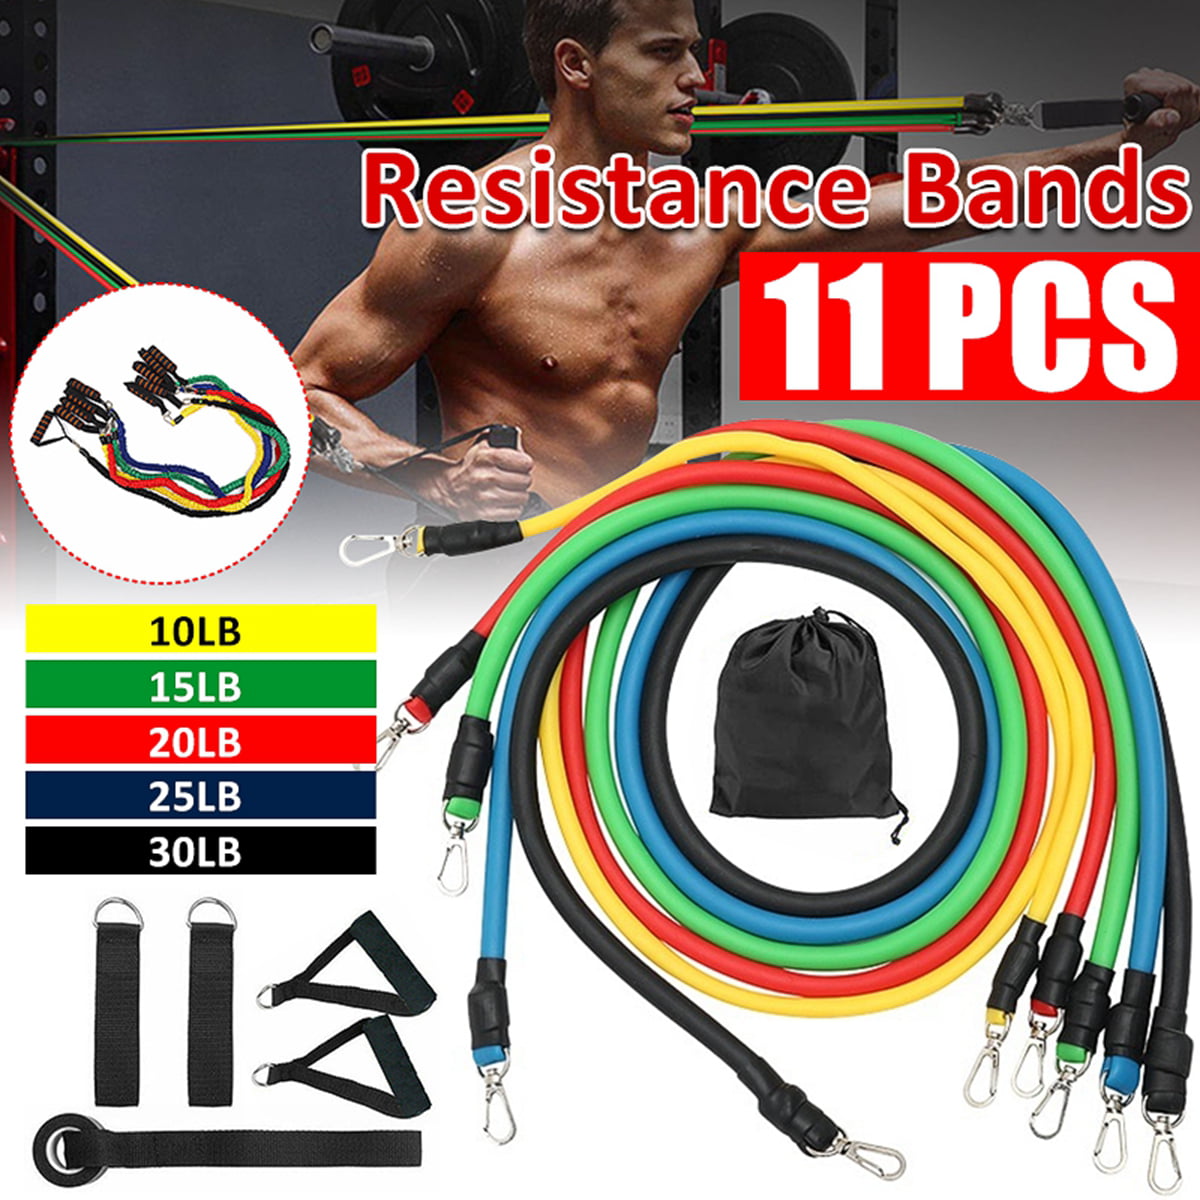 Door Anchor 11 PCS Premium Resistance Rubber Band Set Complete Exercise KIT Tube and Loop Bands Ideal for Training and Workout. Handles Ankle Straps